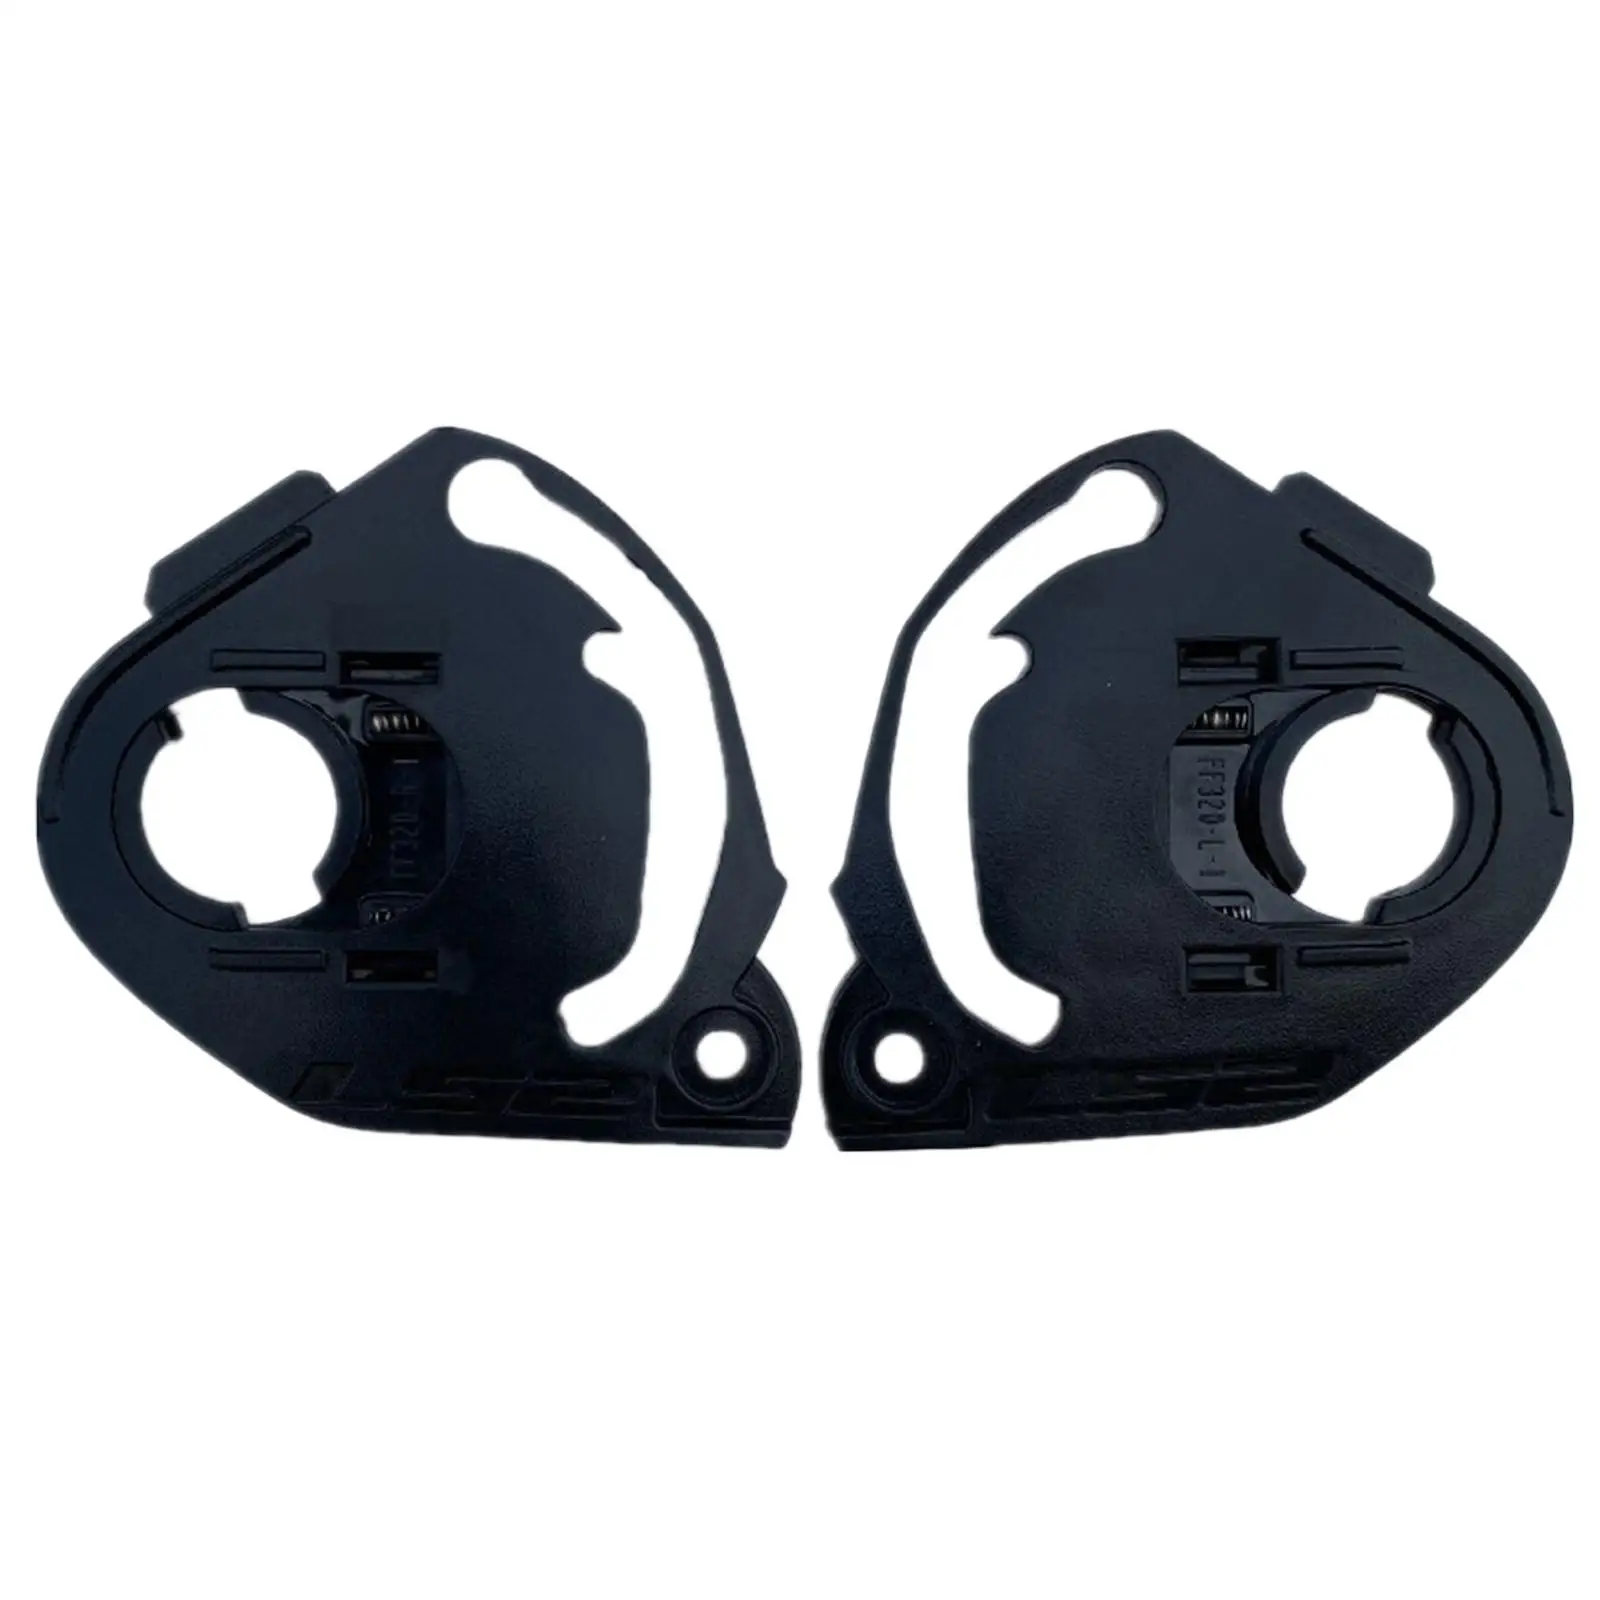 2 Pieces Motorcycle Helmet Lens Base Accessories Fit for Ff328 Ff800 Ff320